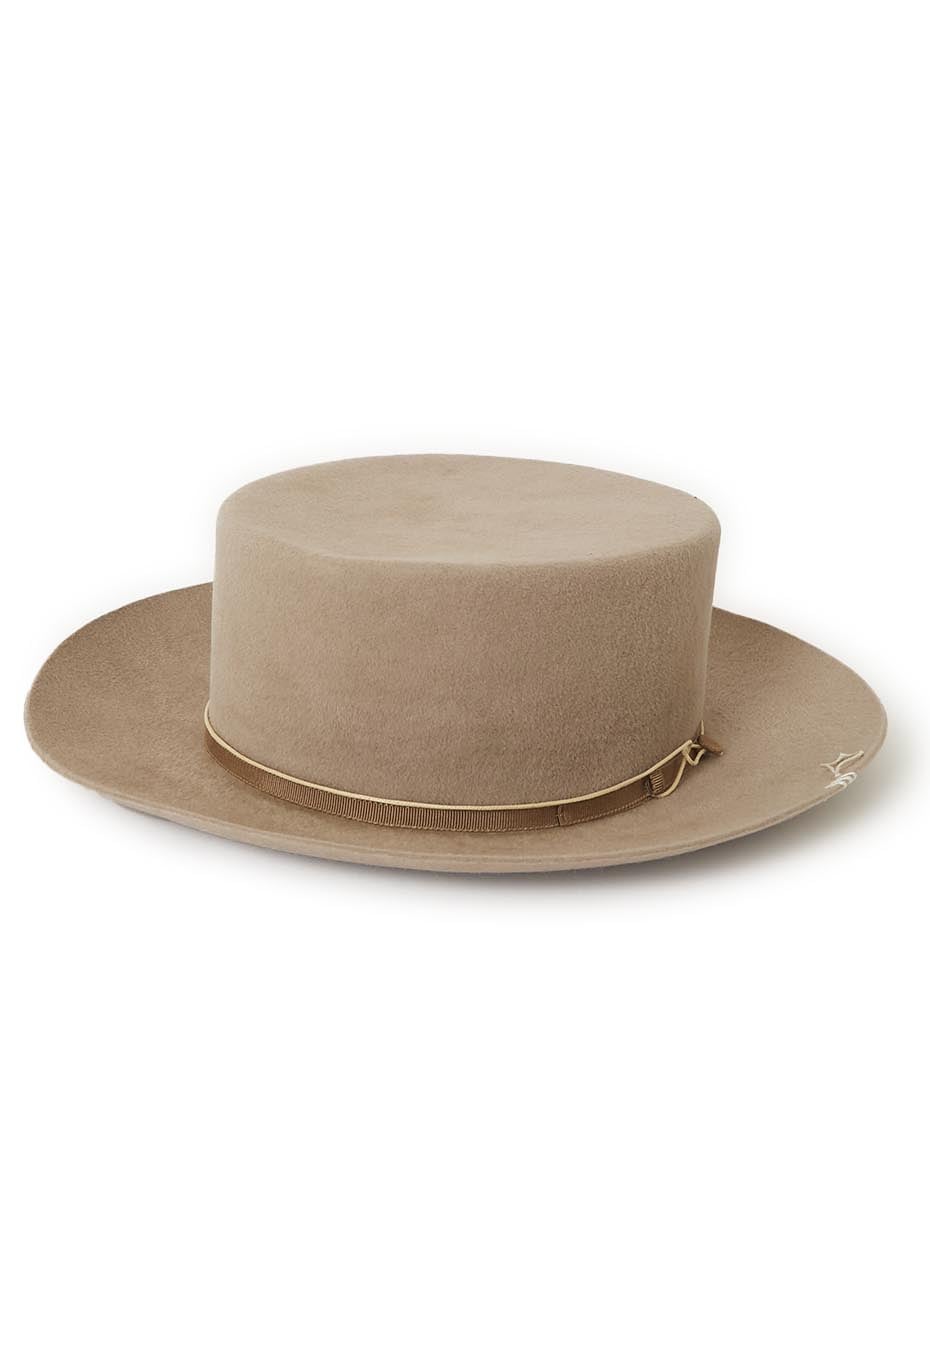 HUNTISM classical boater hat